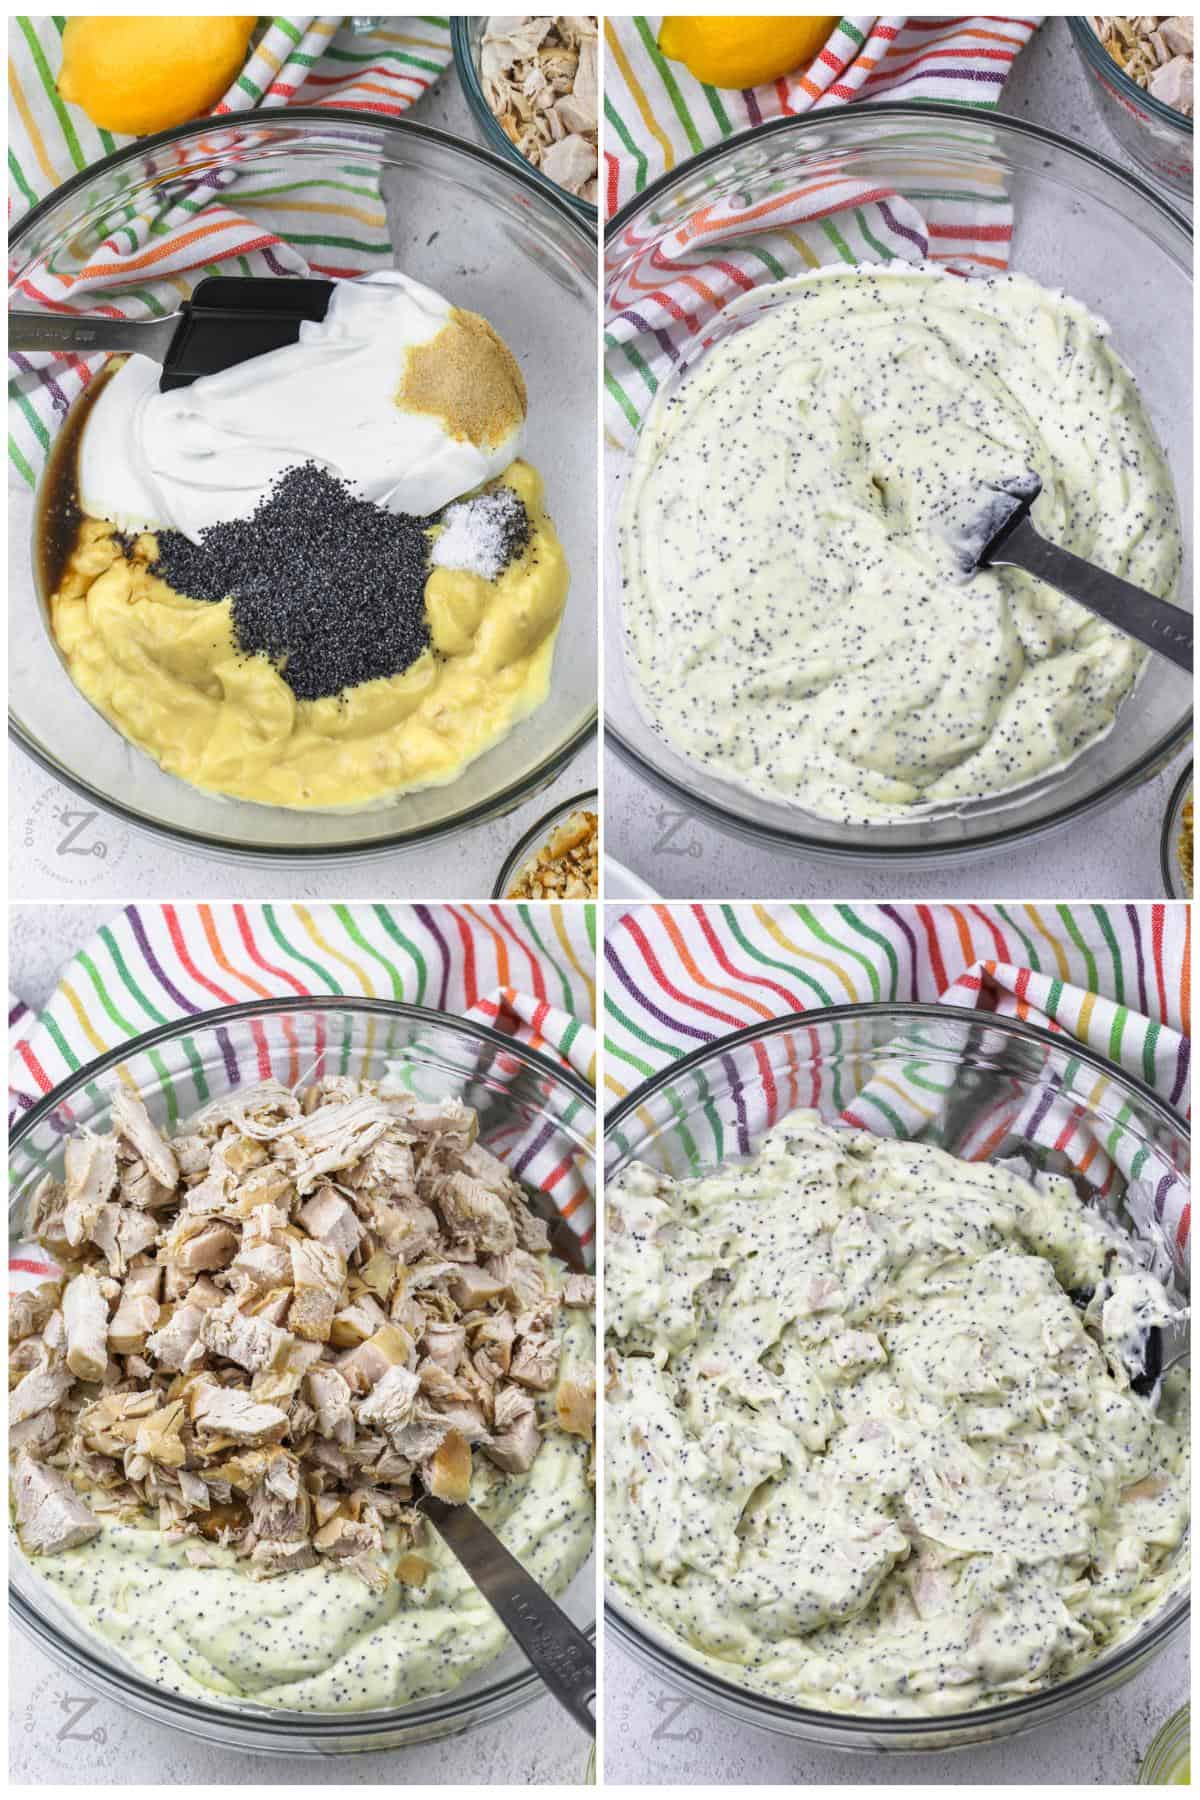 process of adding ingredients together to make Easy Poppyseed Chicken